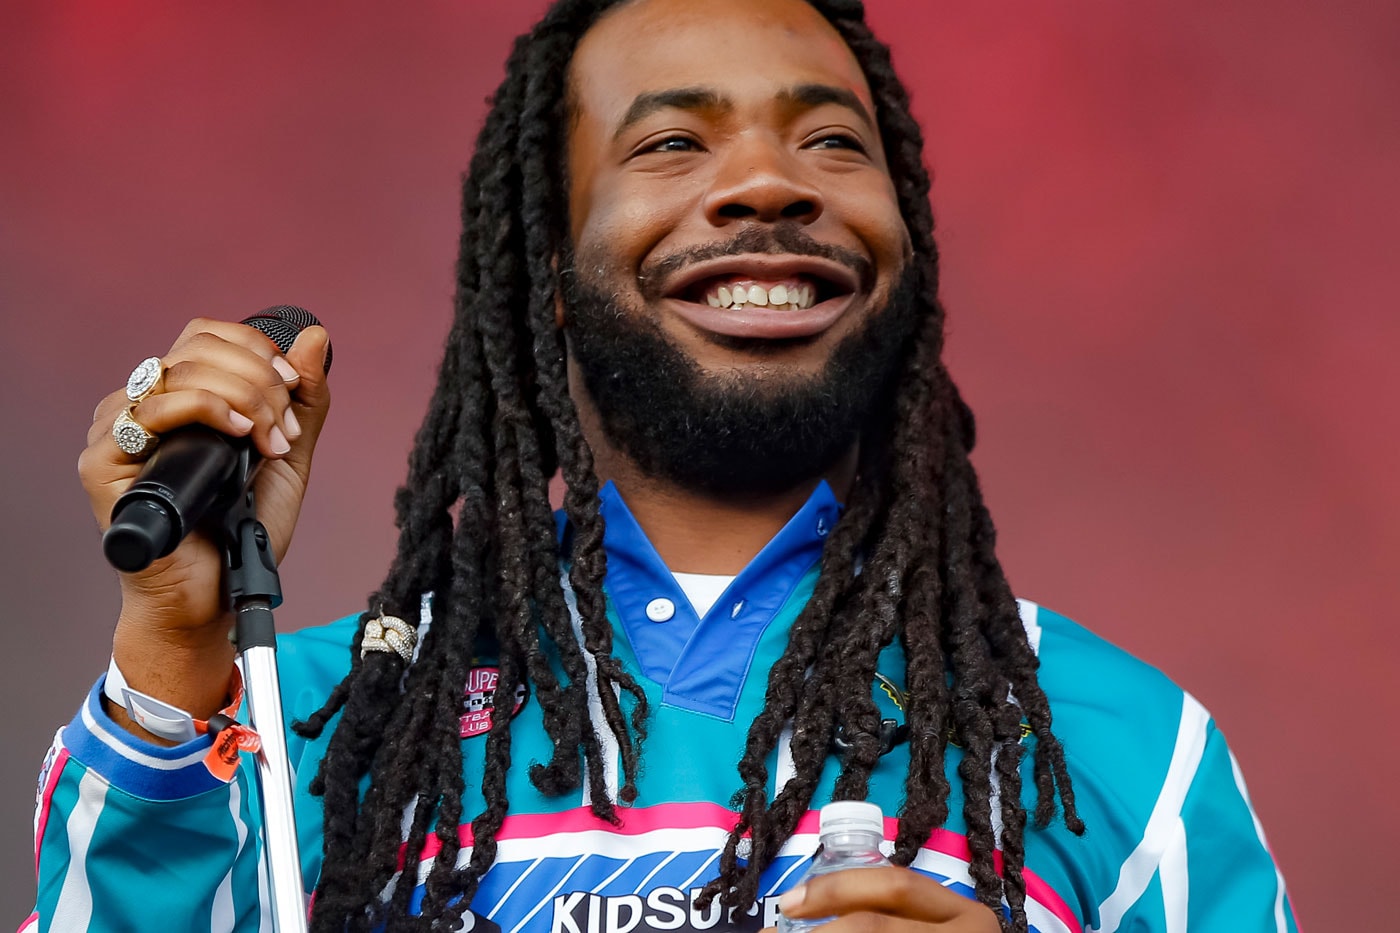 D.R.A.M. on Drake's "Hotline Bling": "I Feel I Got Jacked For My Record"